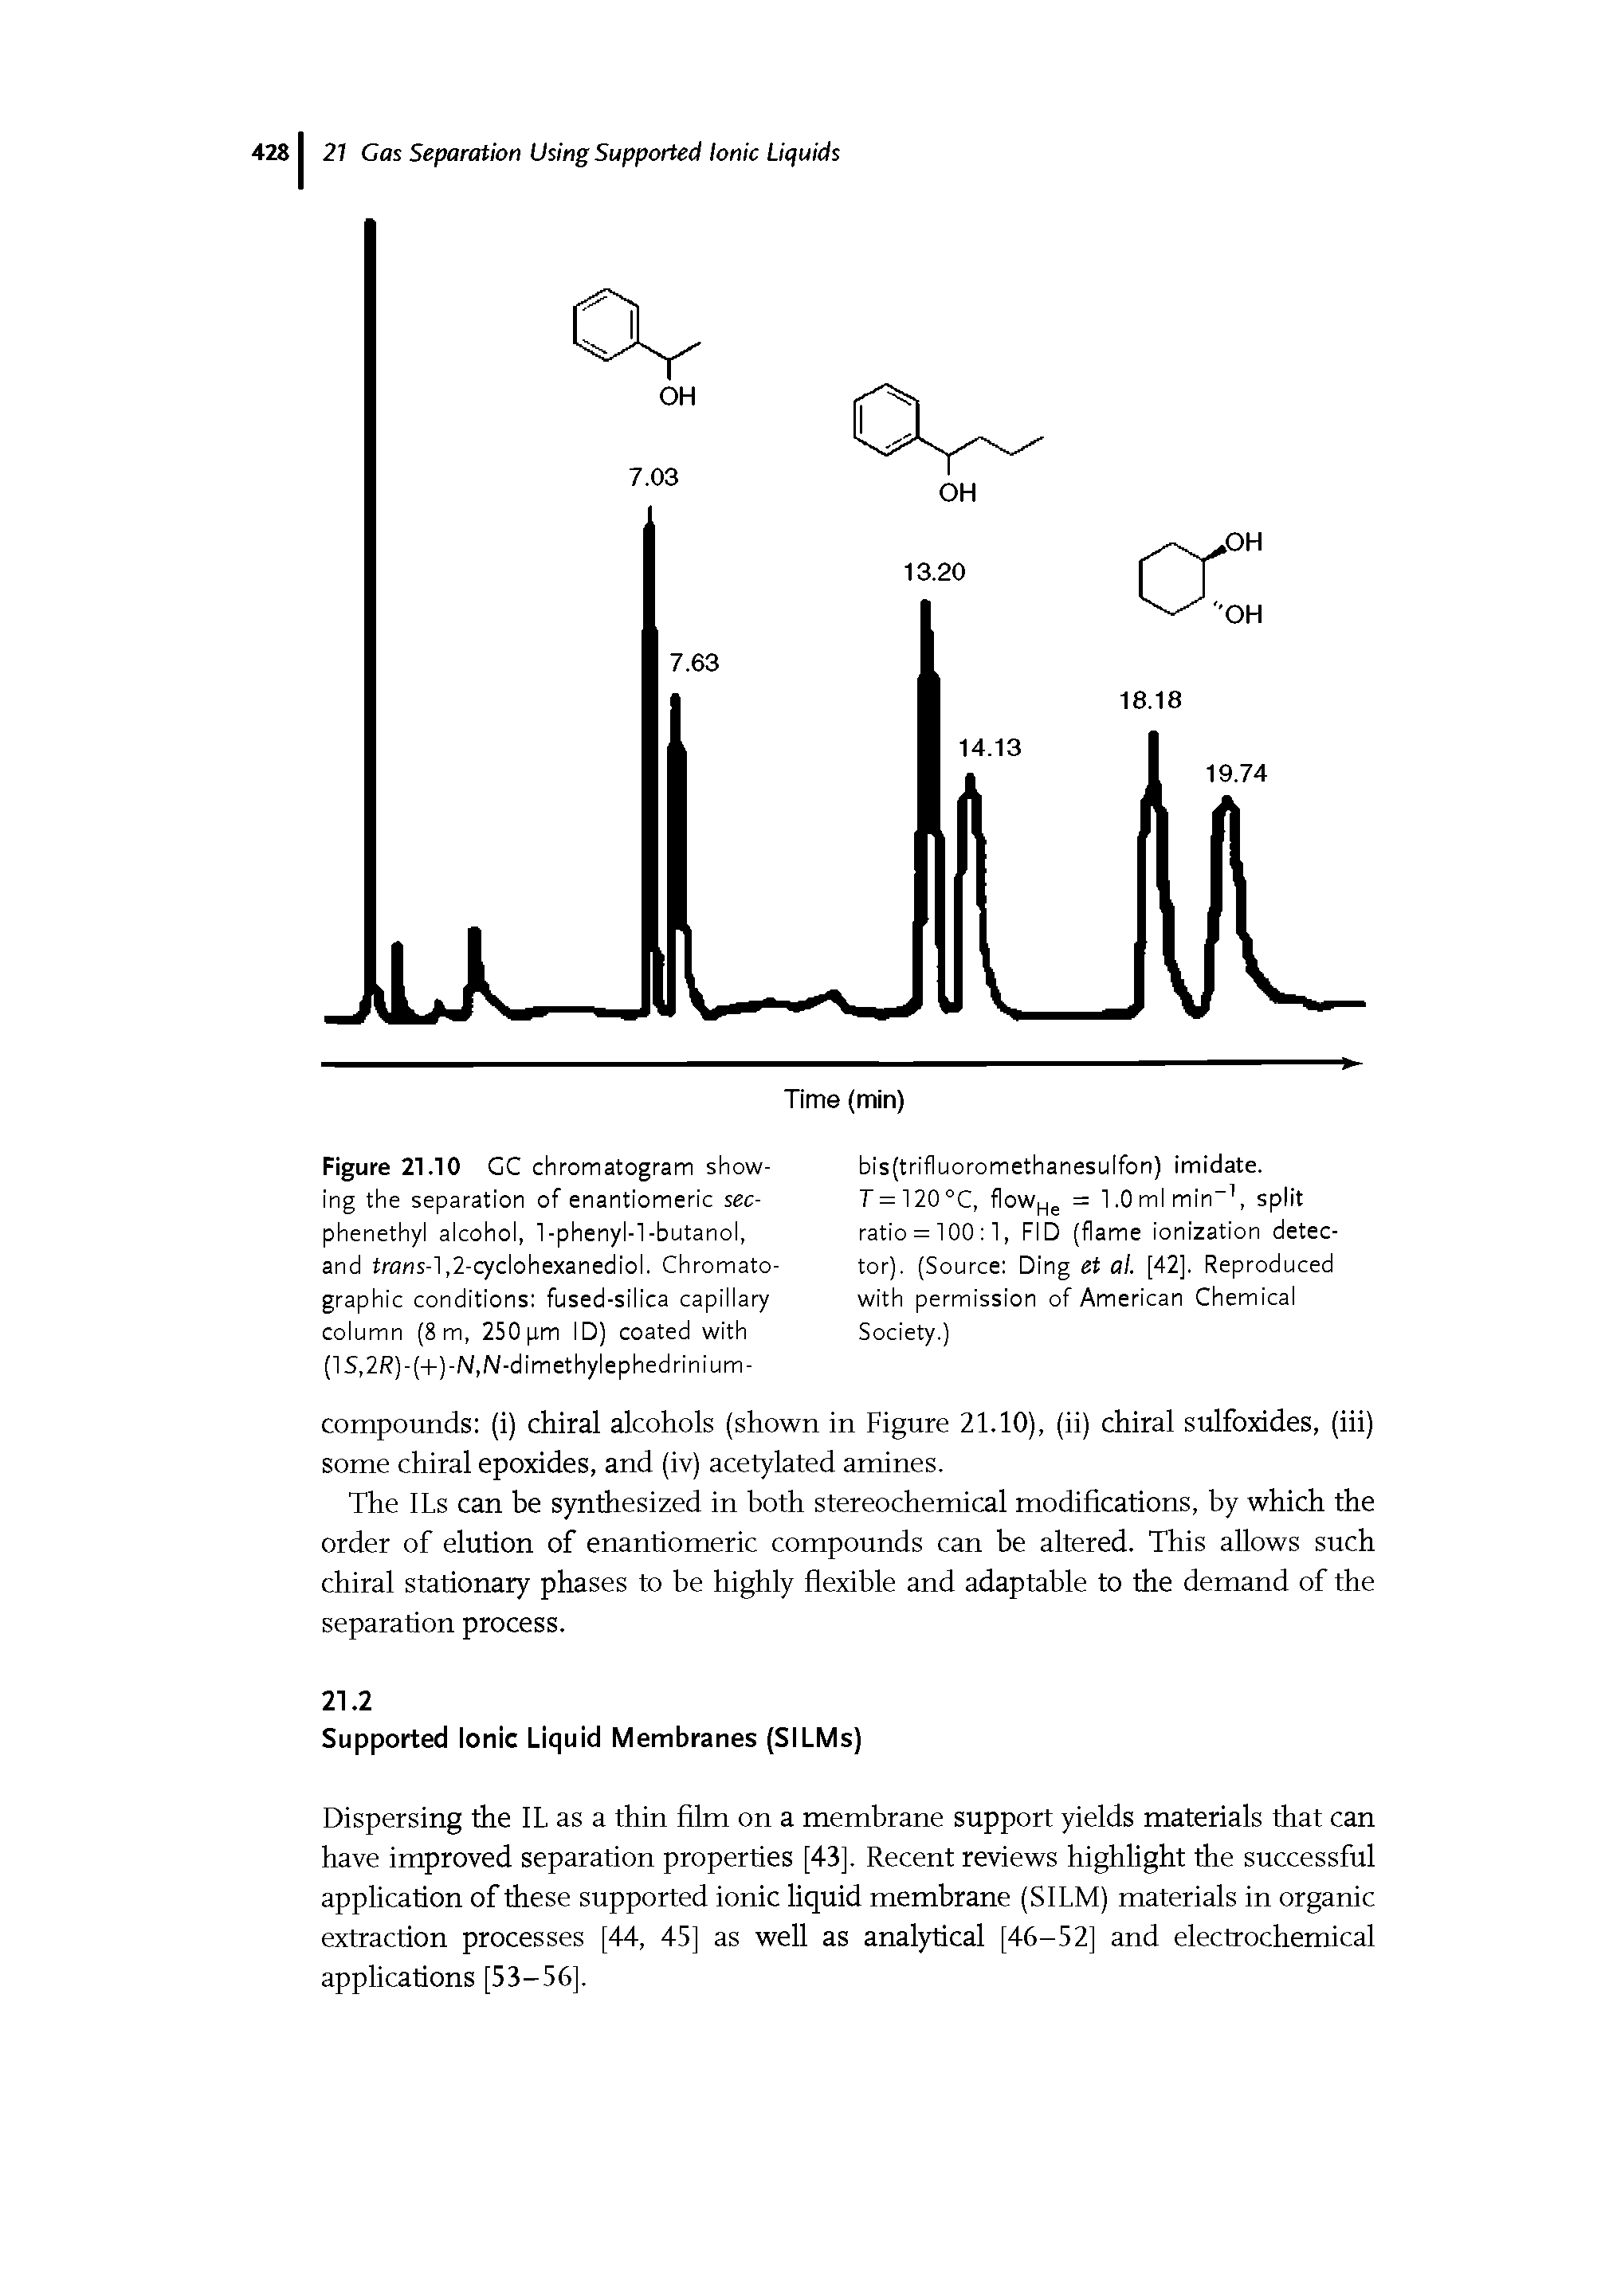 Figure 21.10 CC chromatogram showing the separation of enantiomeric sec-phenethyl alcohol, 1-phenyl-1-butanol, and trans-l,2-cyclohexanediol. Chromatographic conditions fused-silica capillary column (8m, 250pm ID) coated with (lS,2R)-(H-)-N,N-dimethylephedrinium-...